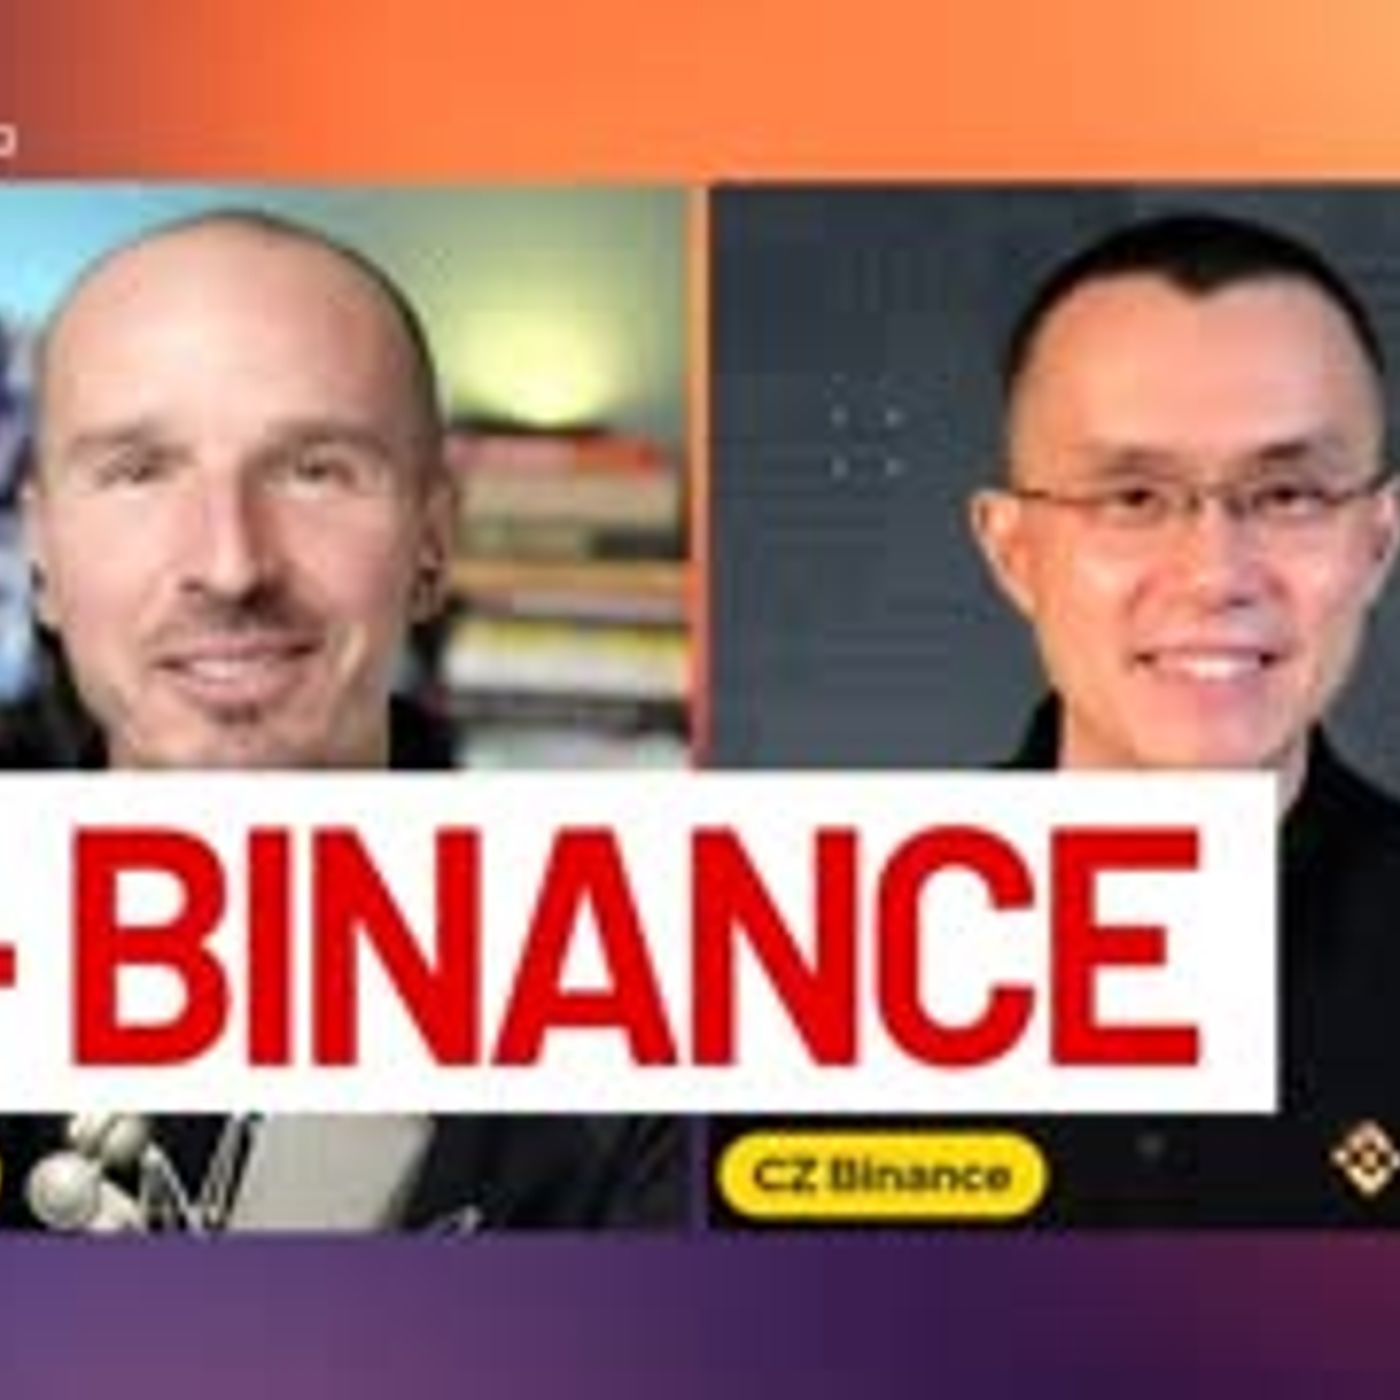 The future of NFT and Bitcoin, a conversation with CZ (Binance CEO)